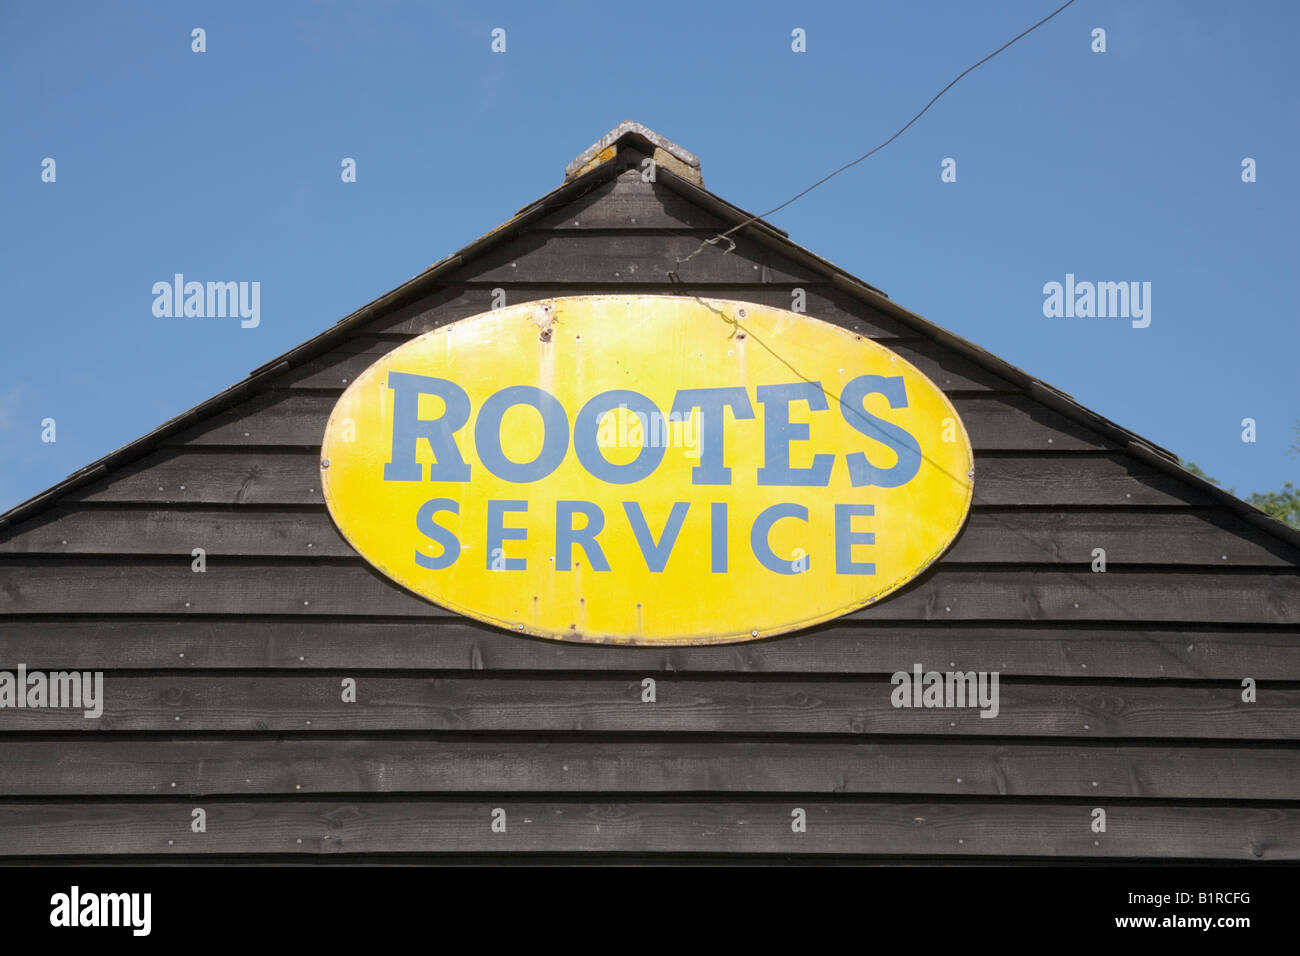 Rootes Service Stock Photo